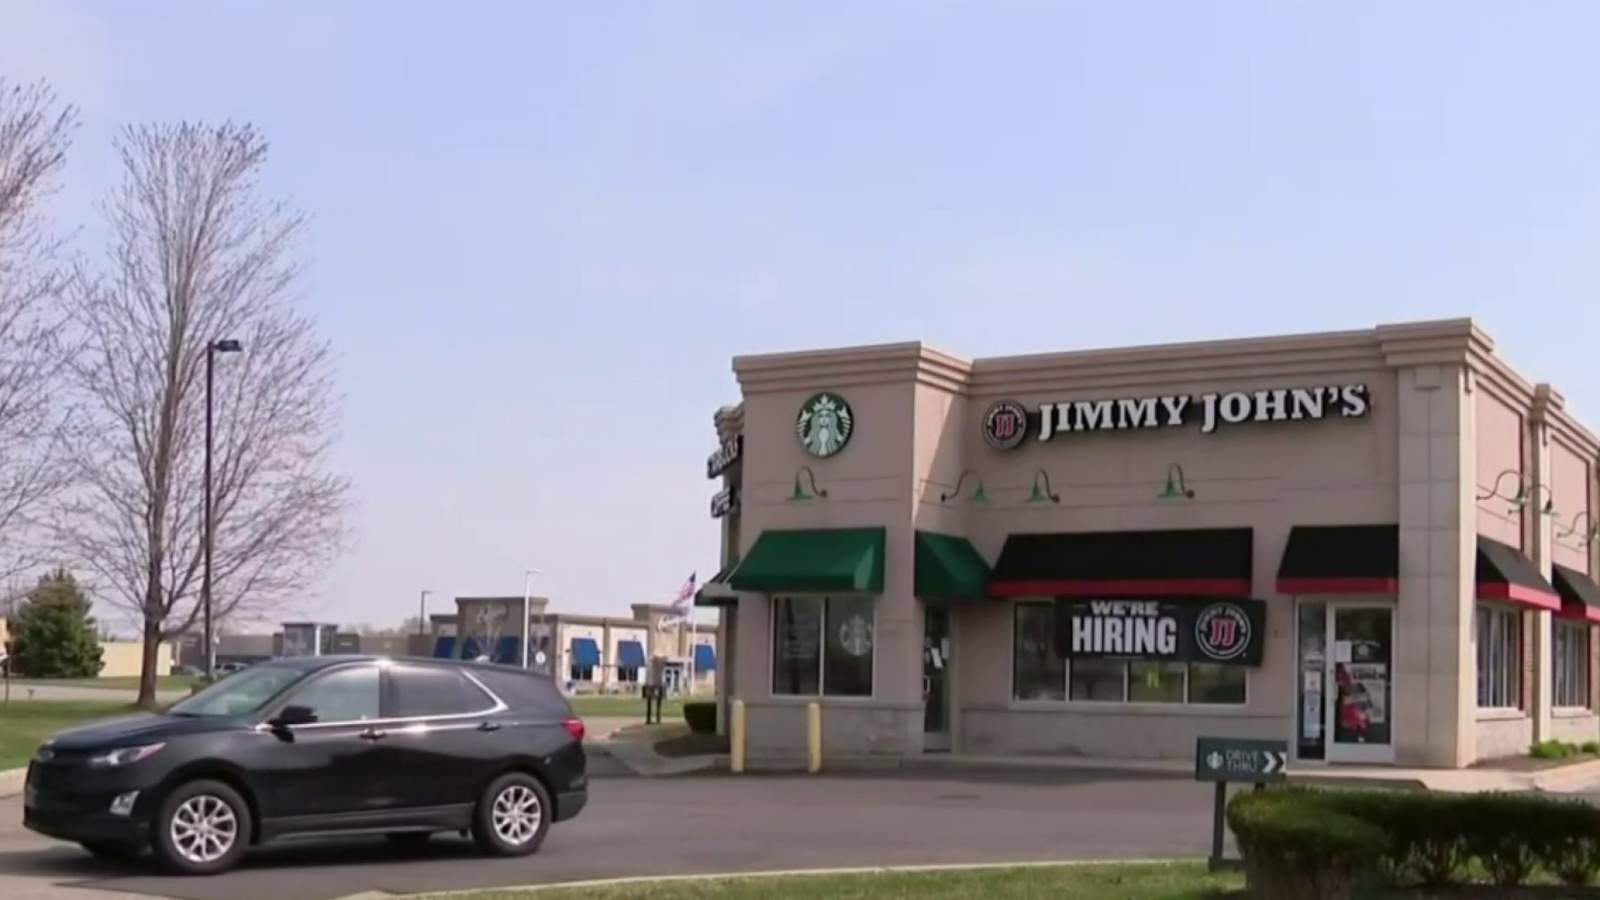 Manager testifies about former employee accused of raping 17-year-old co-worker at Sterling Heights Jimmy John’s